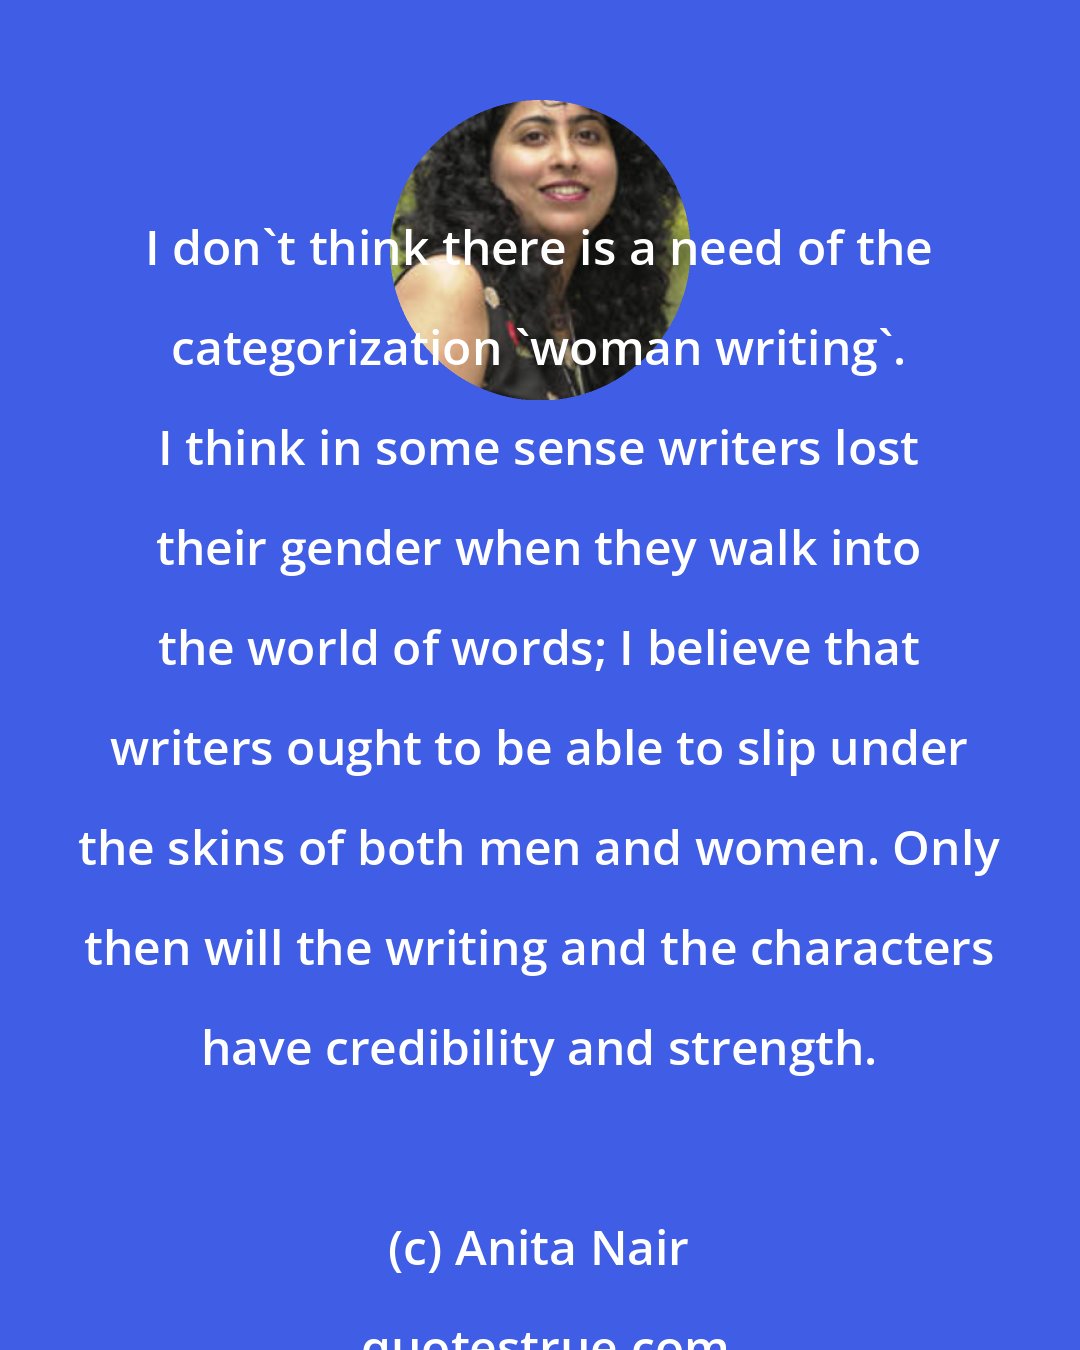 Anita Nair: I don't think there is a need of the categorization 'woman writing'. I think in some sense writers lost their gender when they walk into the world of words; I believe that writers ought to be able to slip under the skins of both men and women. Only then will the writing and the characters have credibility and strength.